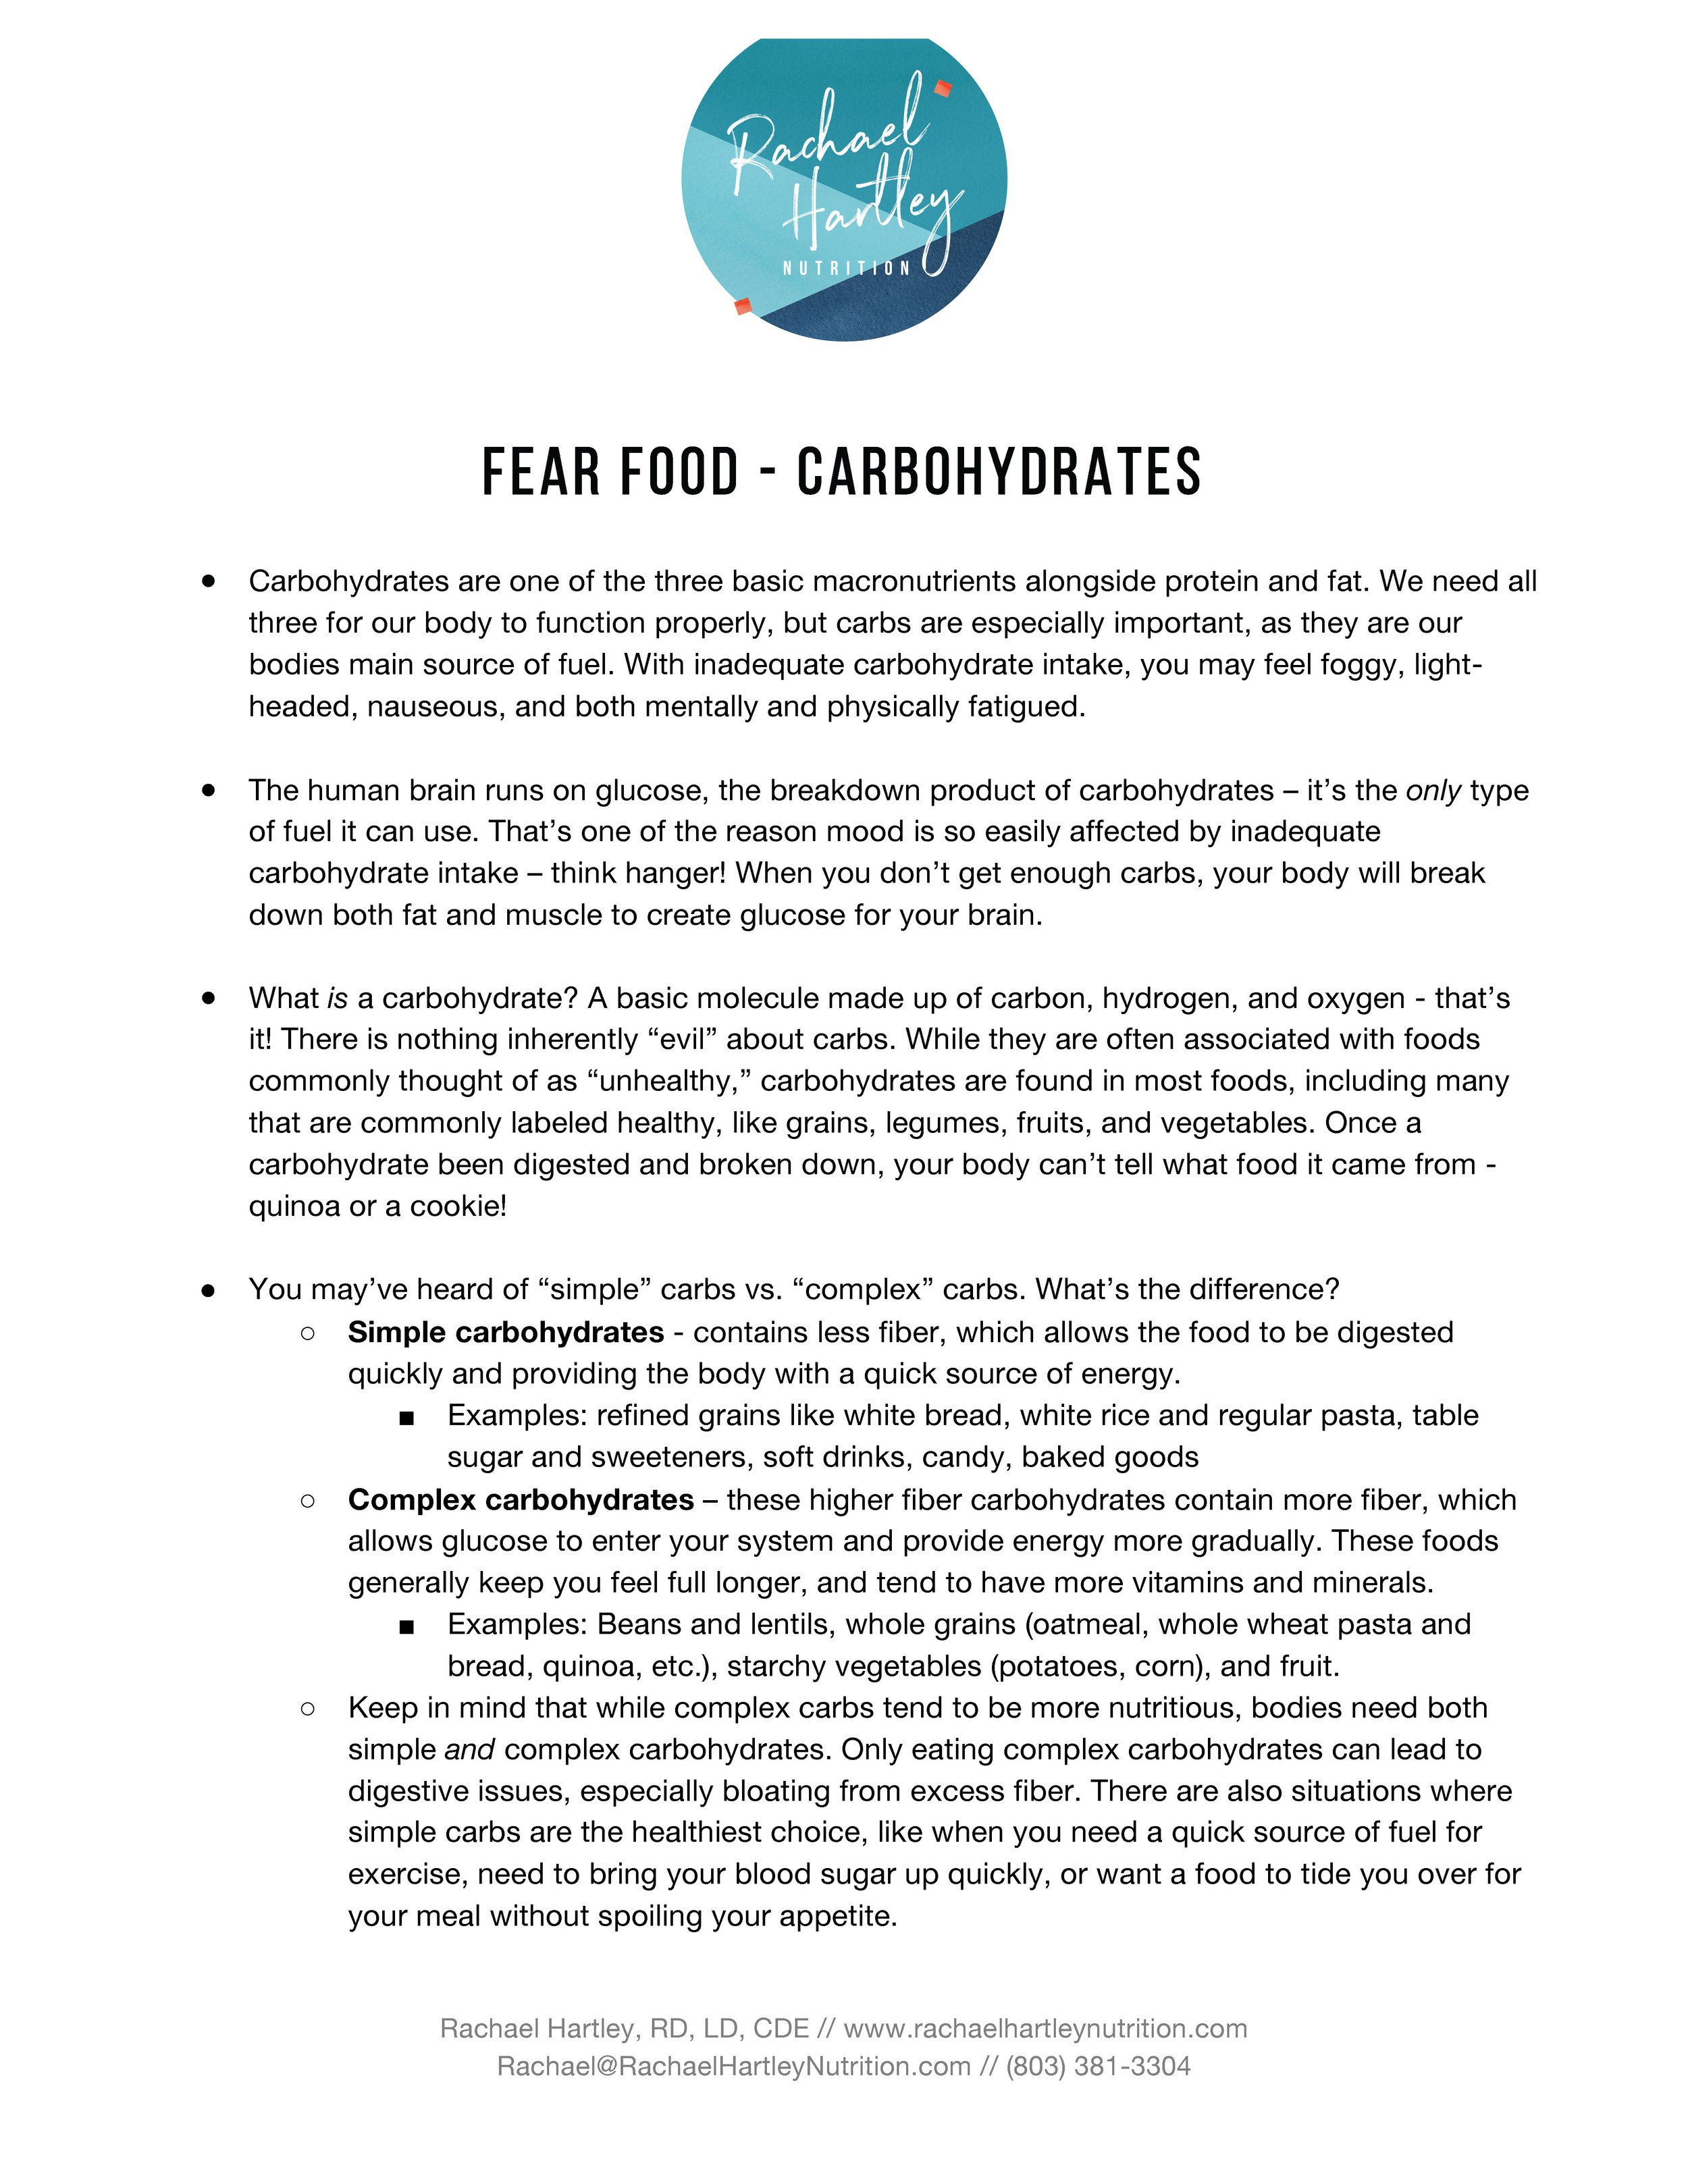 Fear Food - Carbohydrates